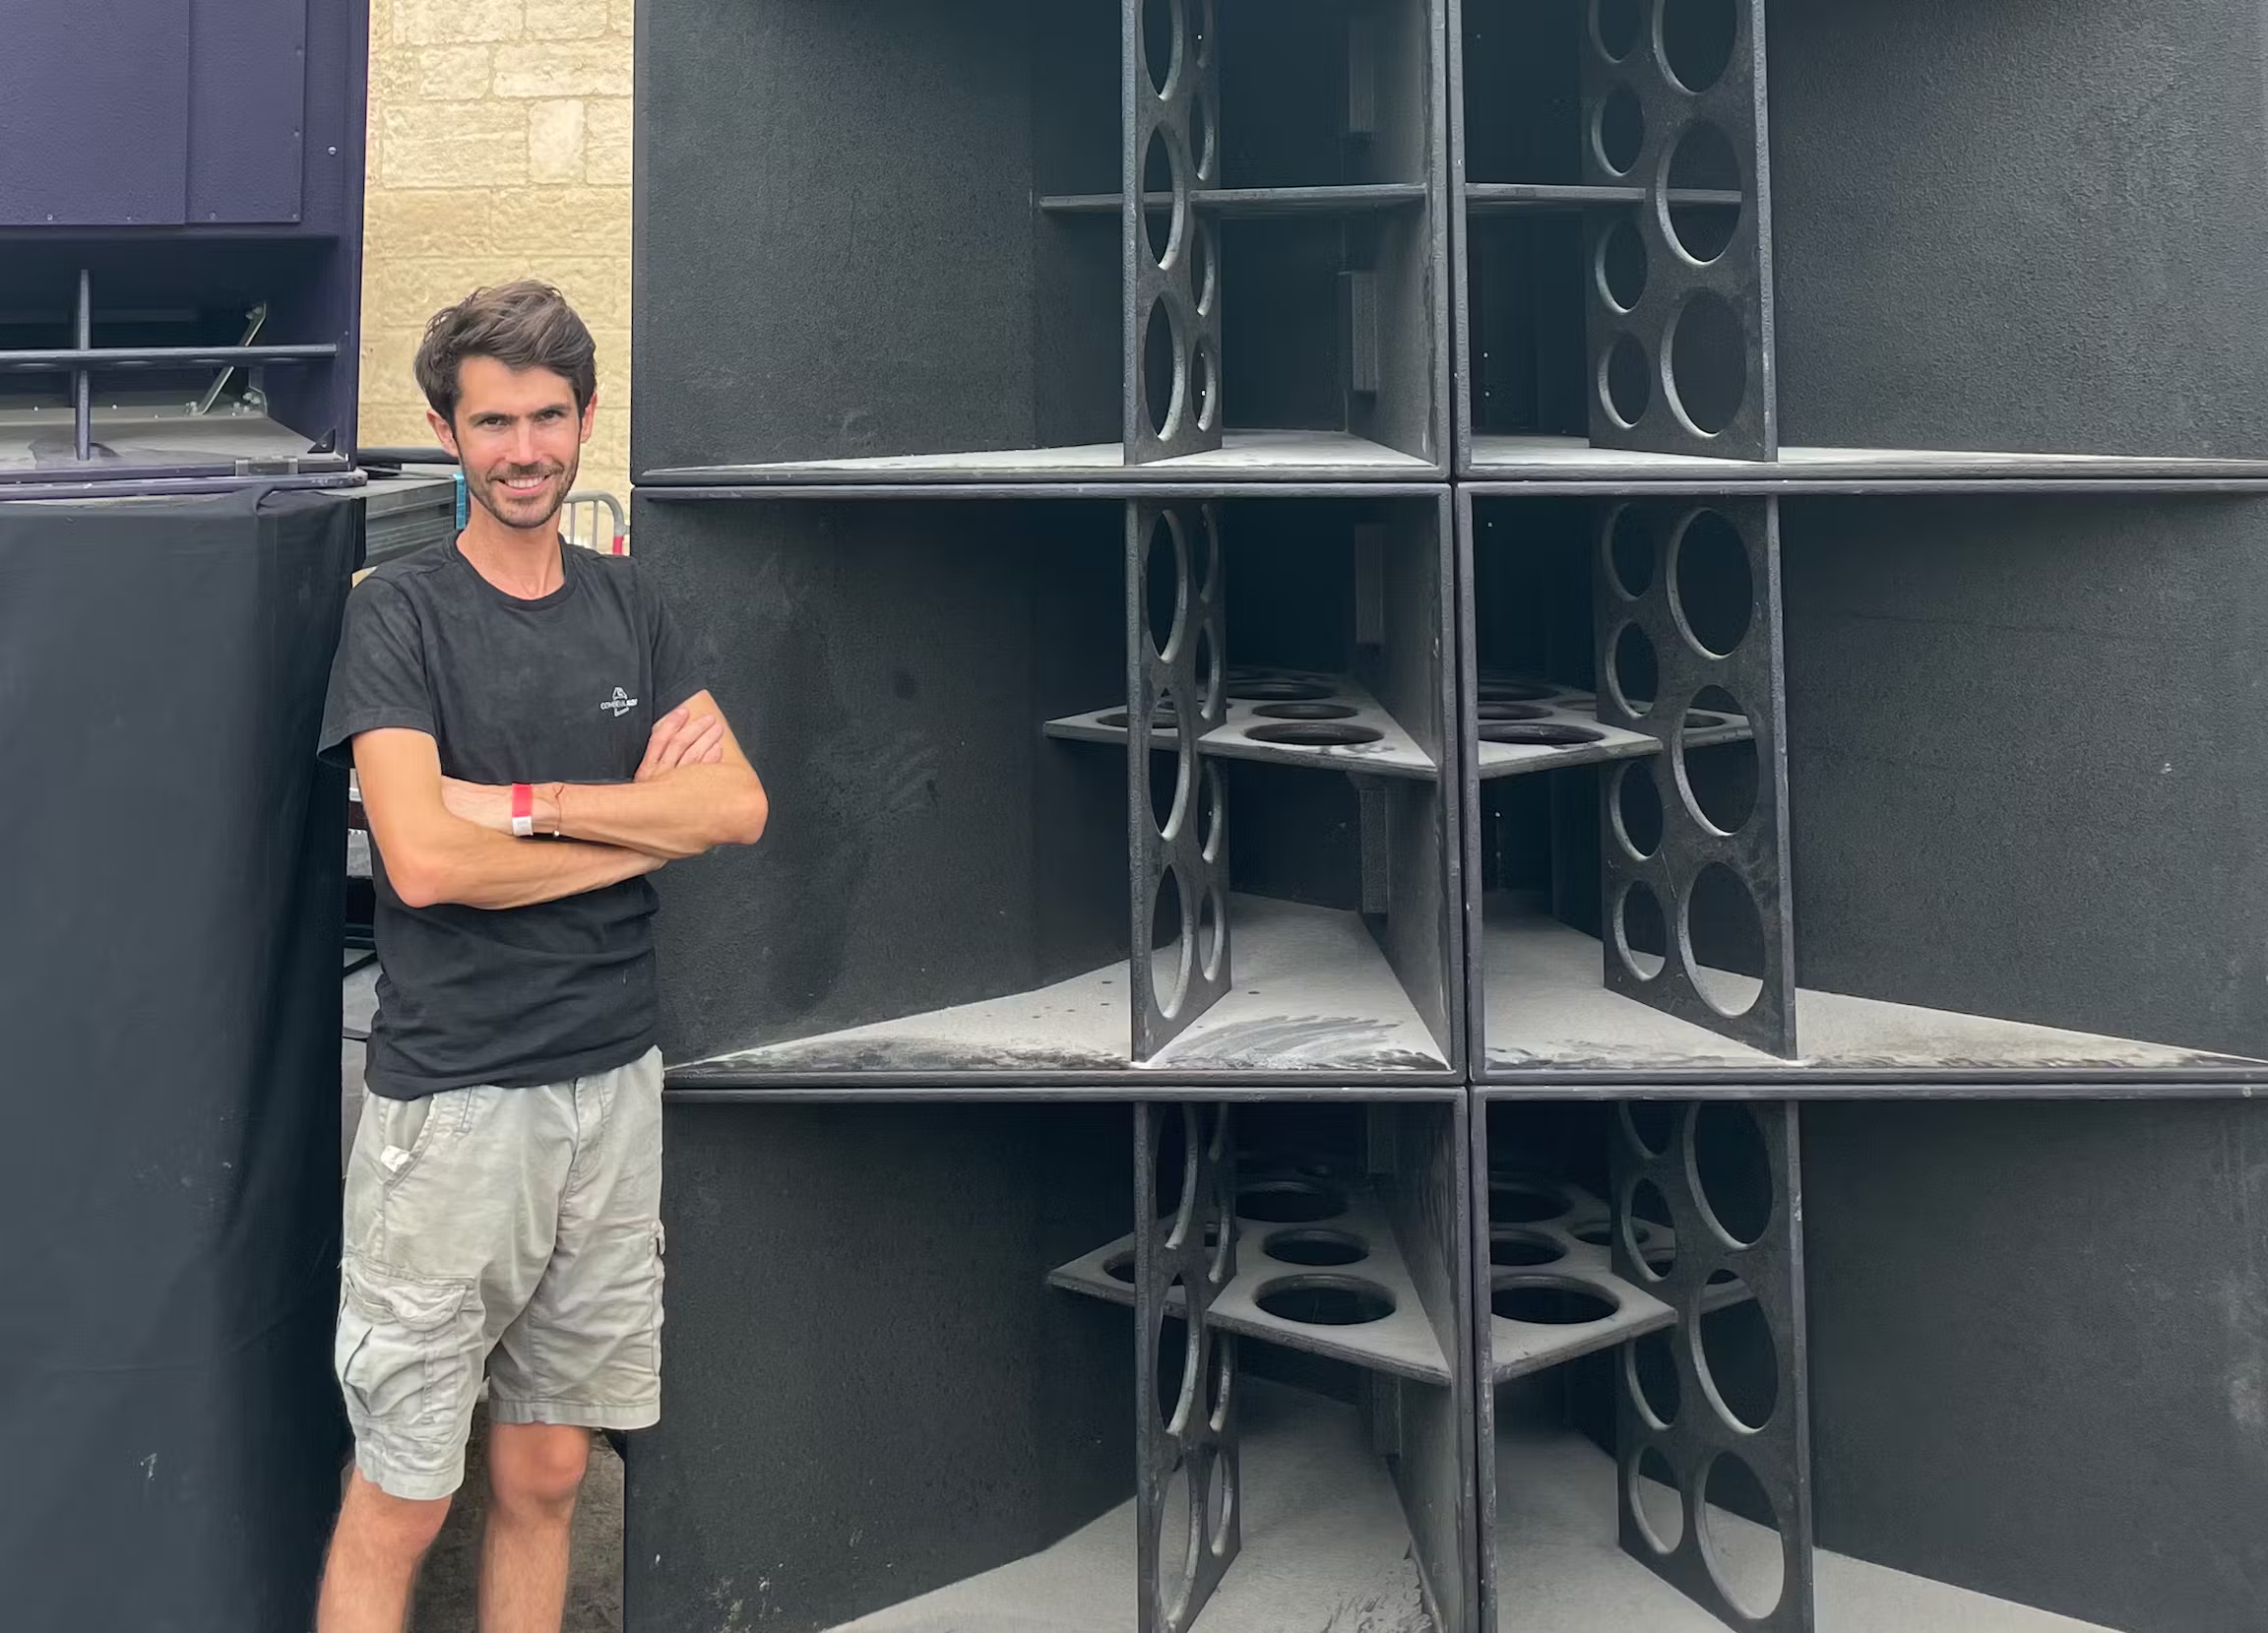 It started with Dance Stacks – Interview with Combeuil Audio’s Founder